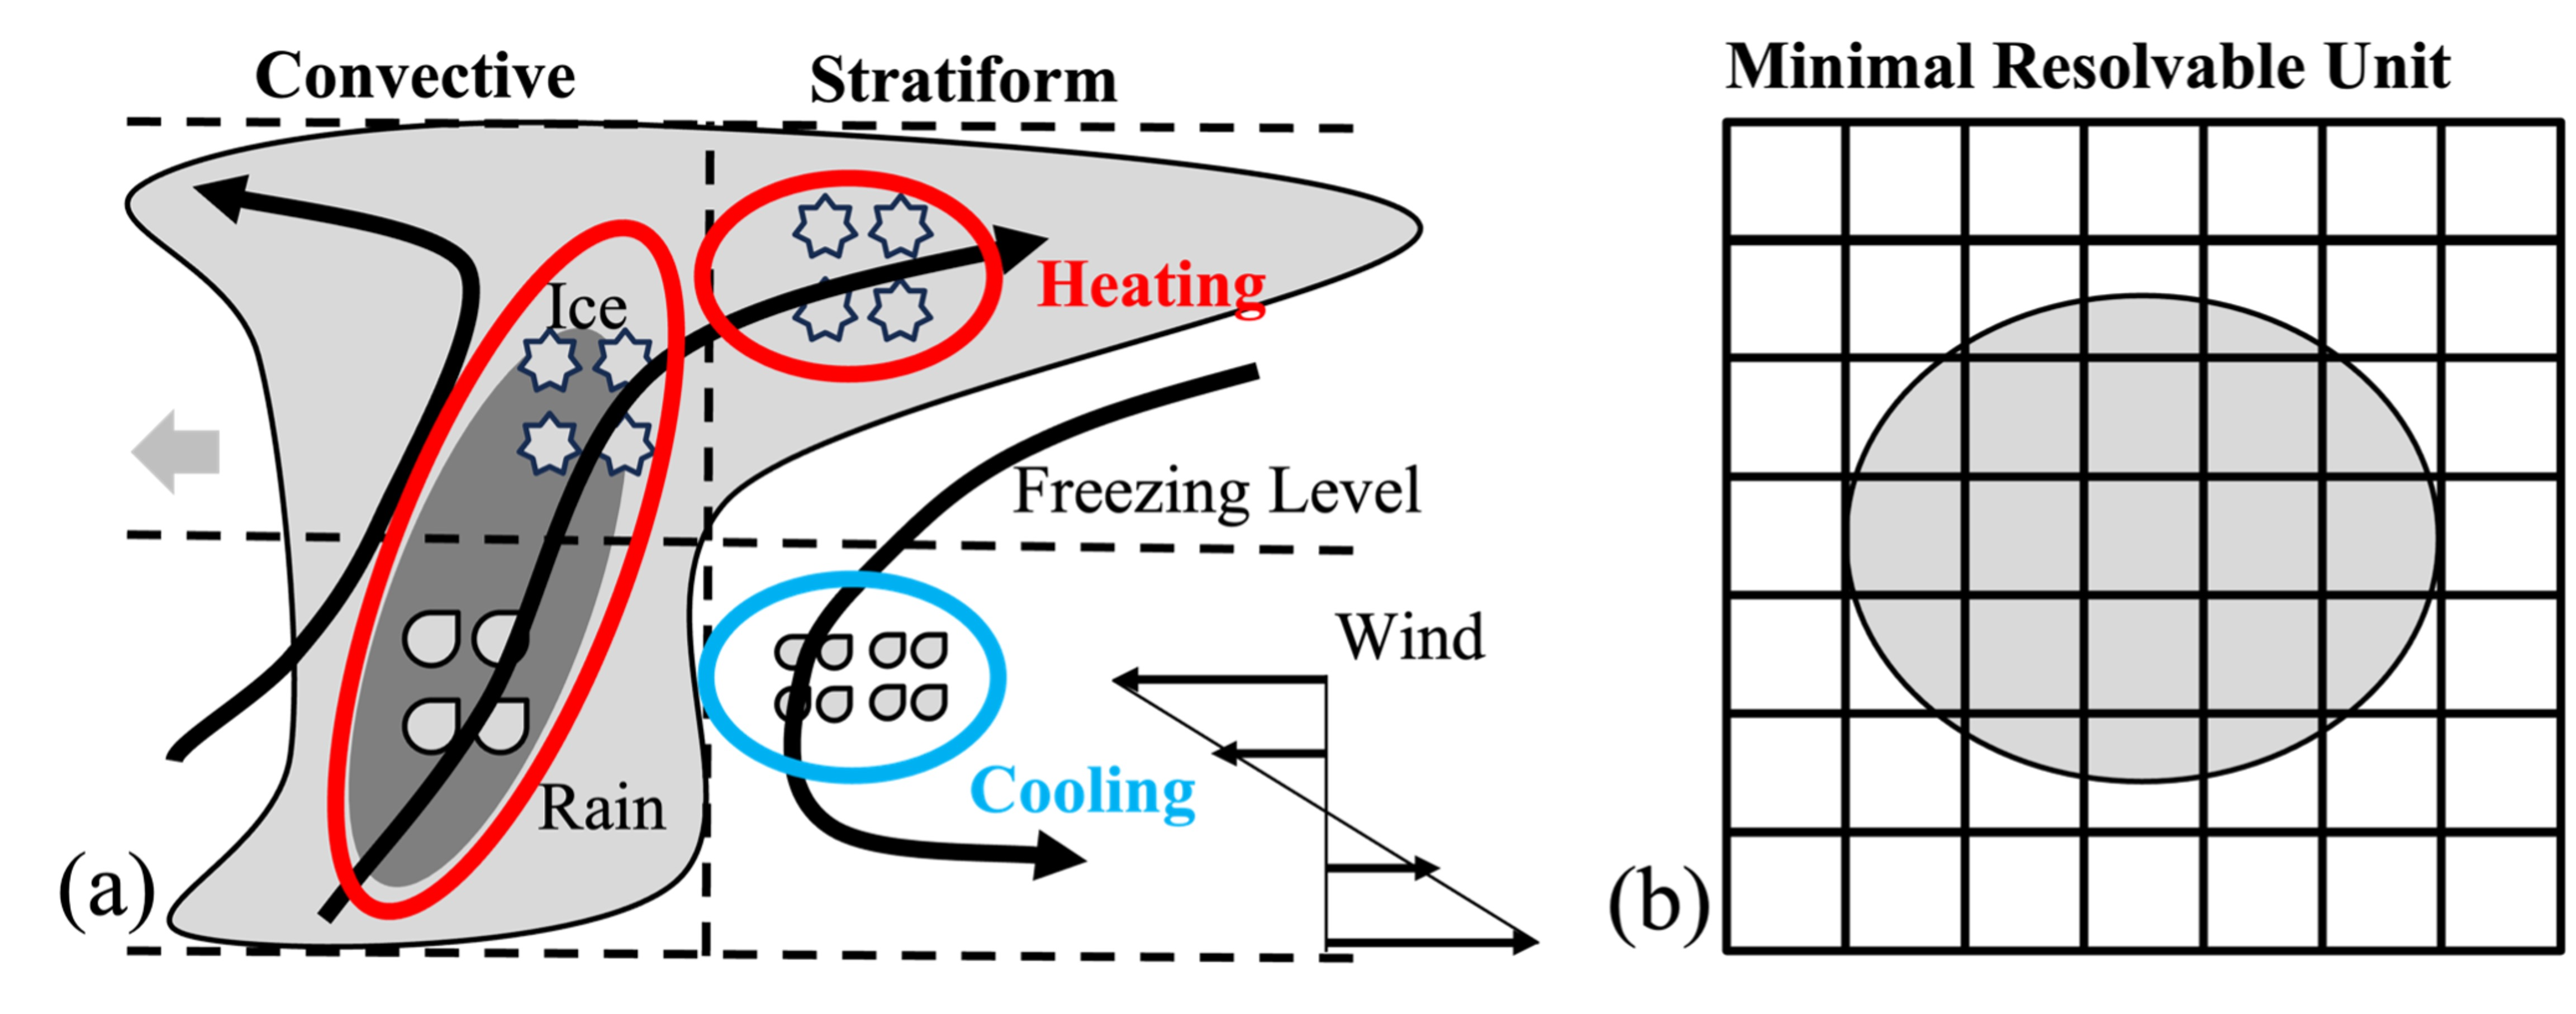 A schematic of a Mesoscale Convective System